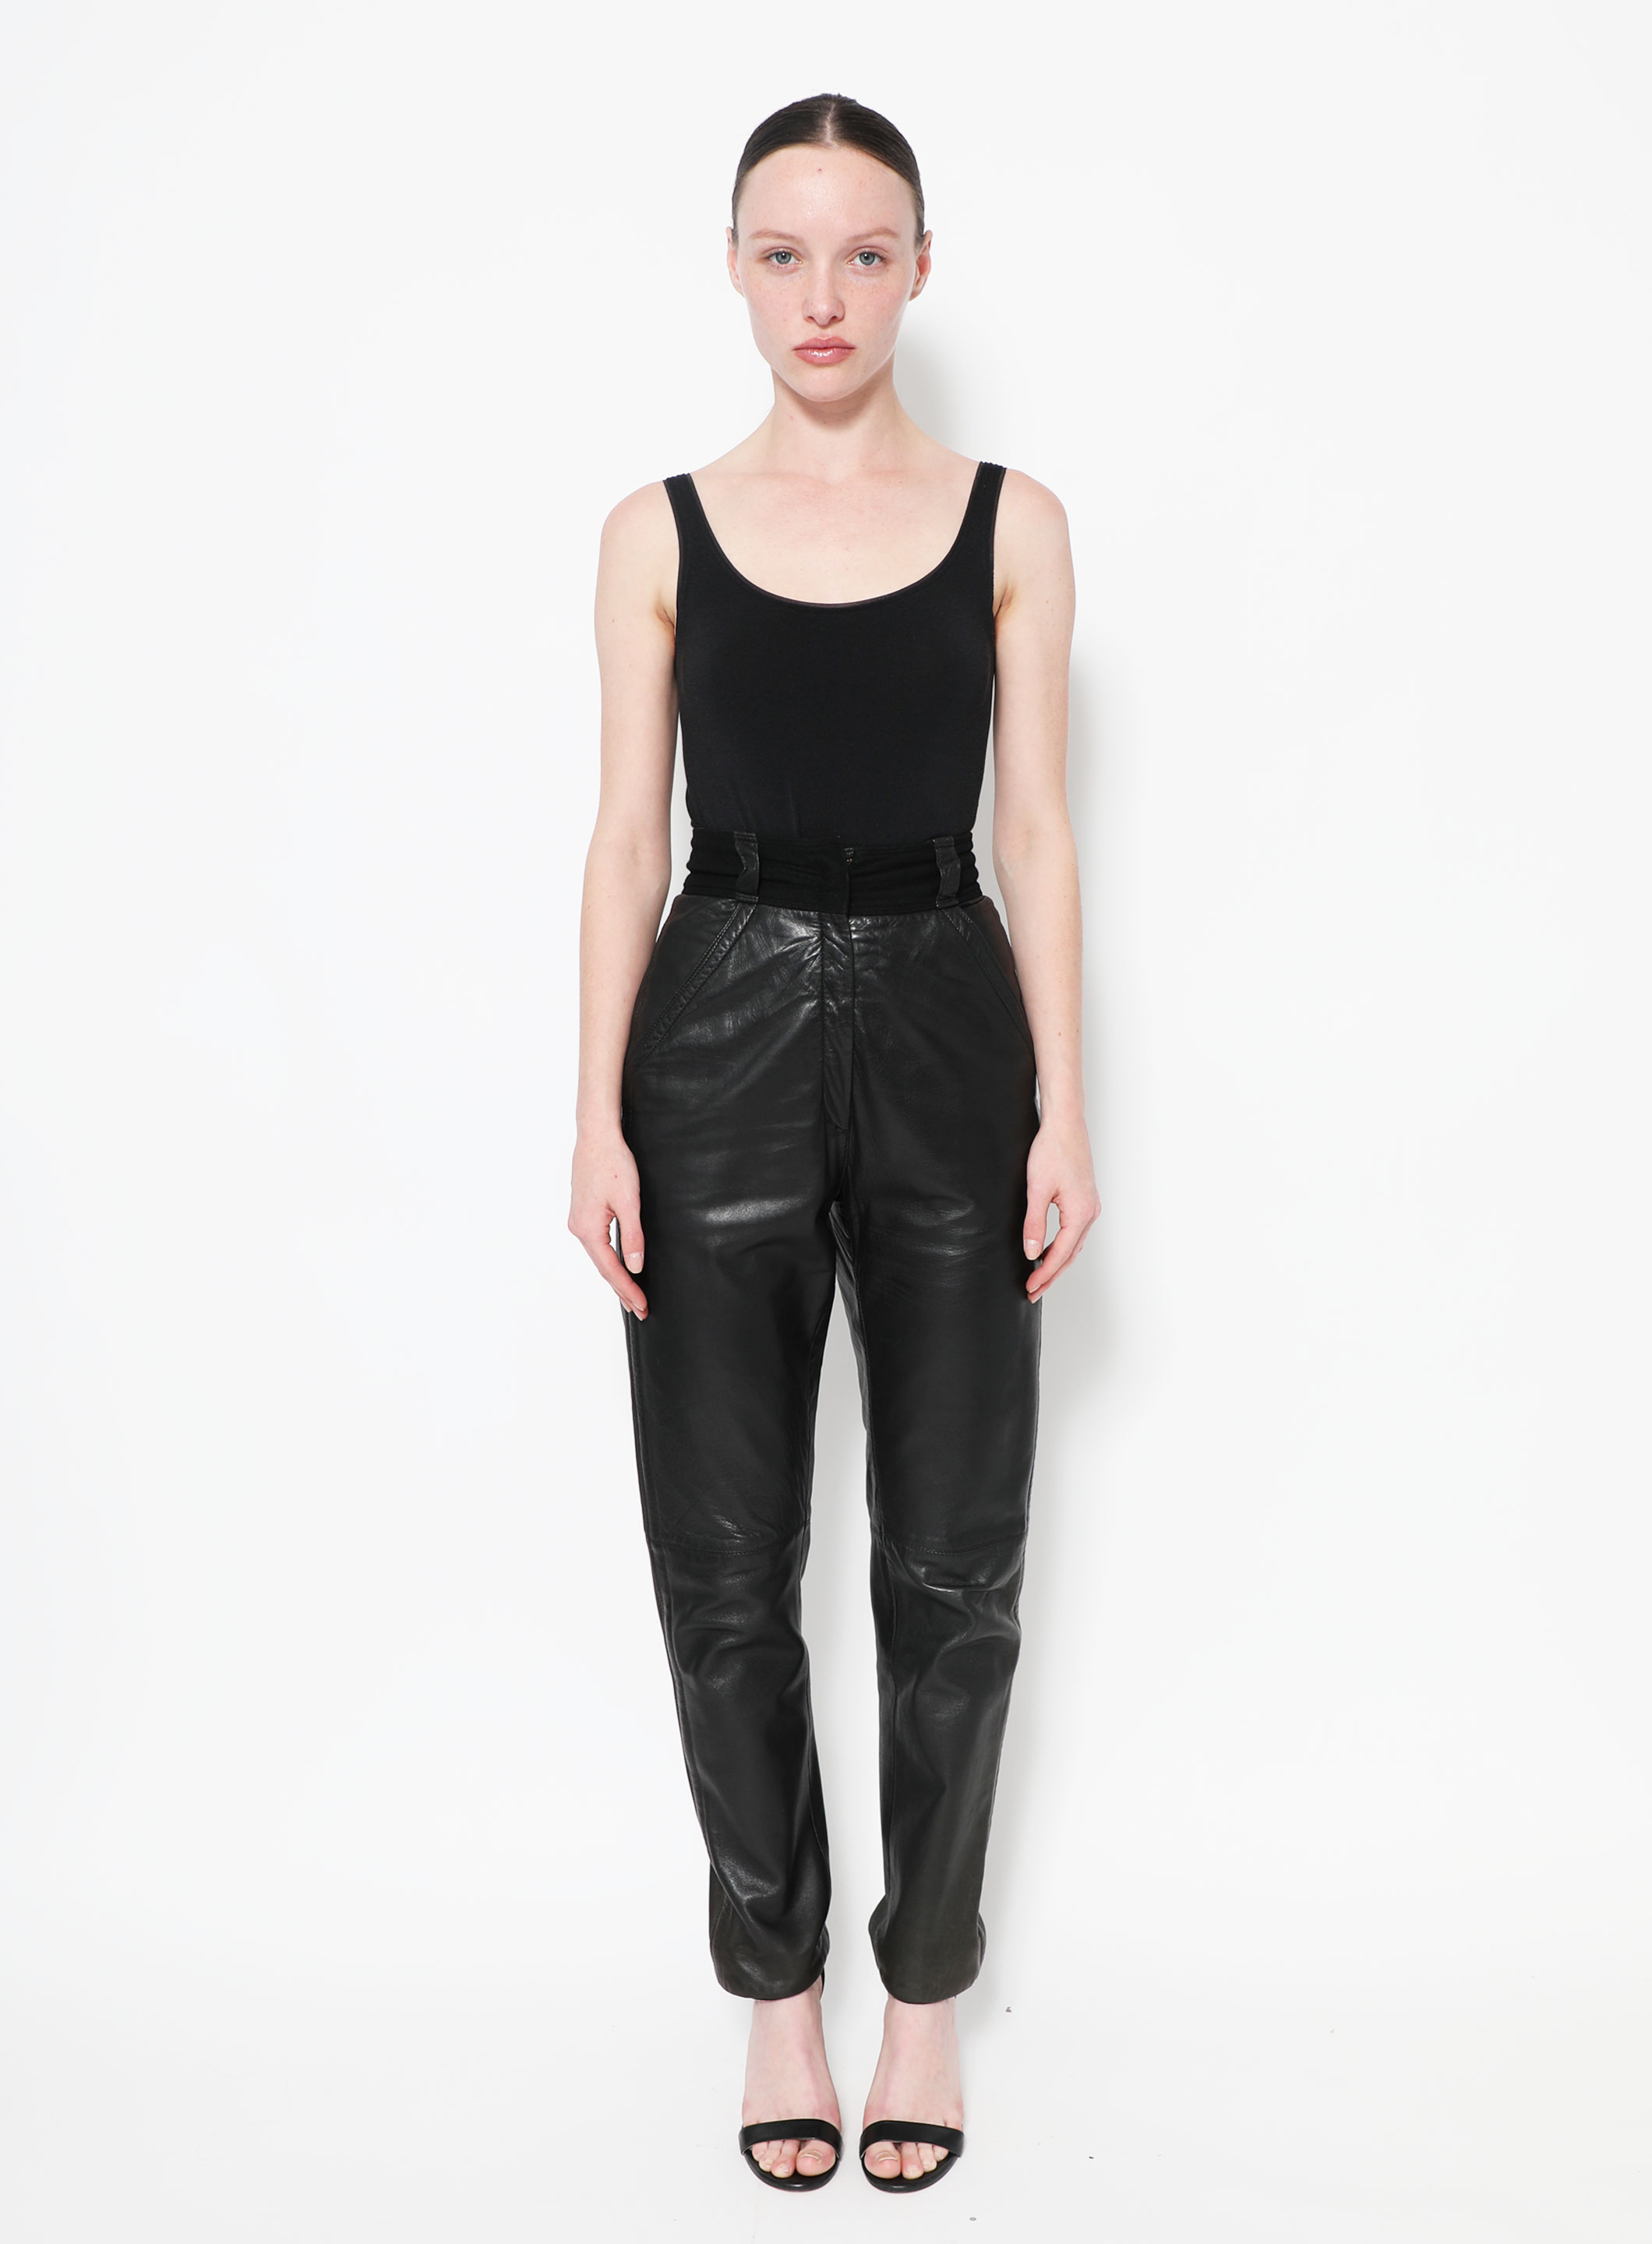 '80s High-Wasted Leather Pants